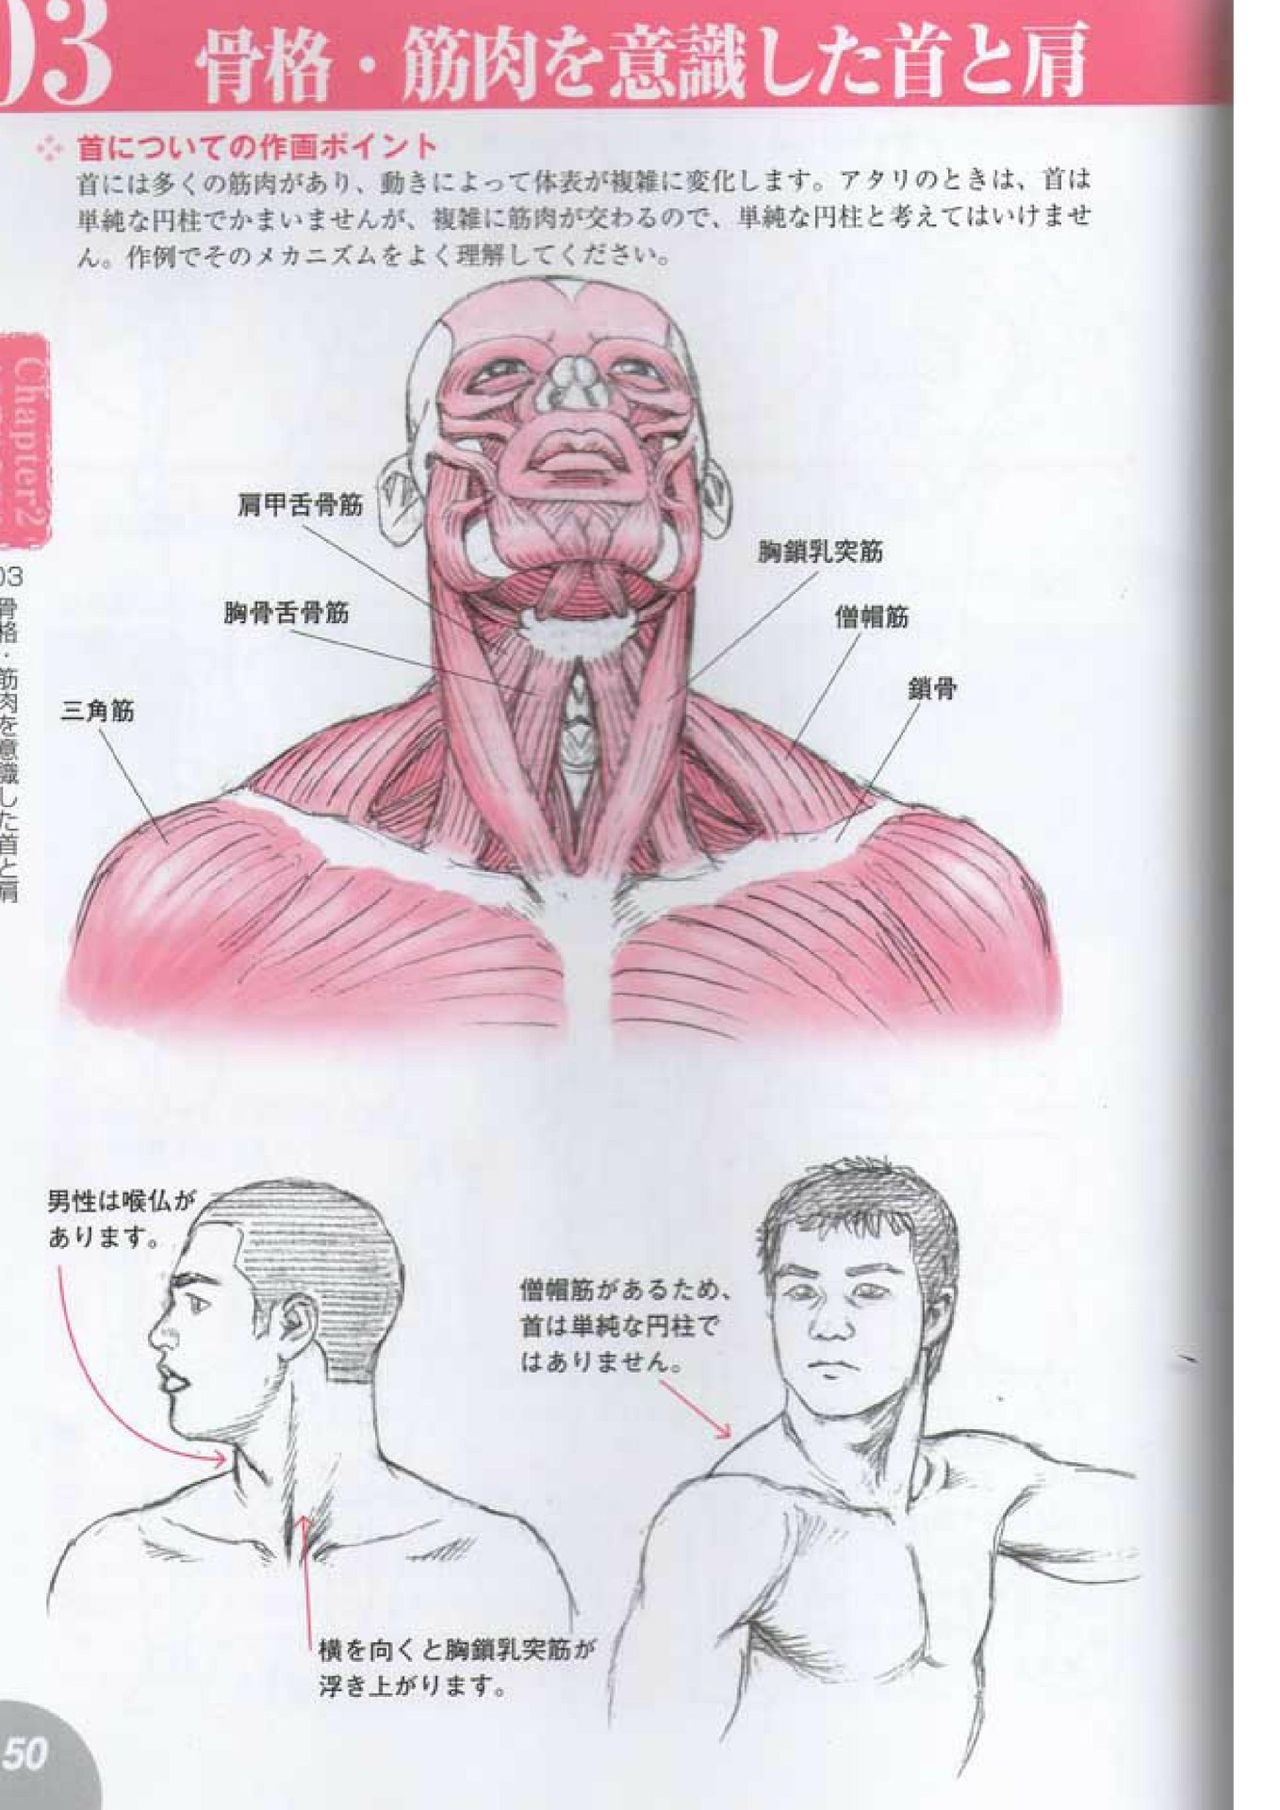 How to draw a character drawing from a human anatomical chart 48